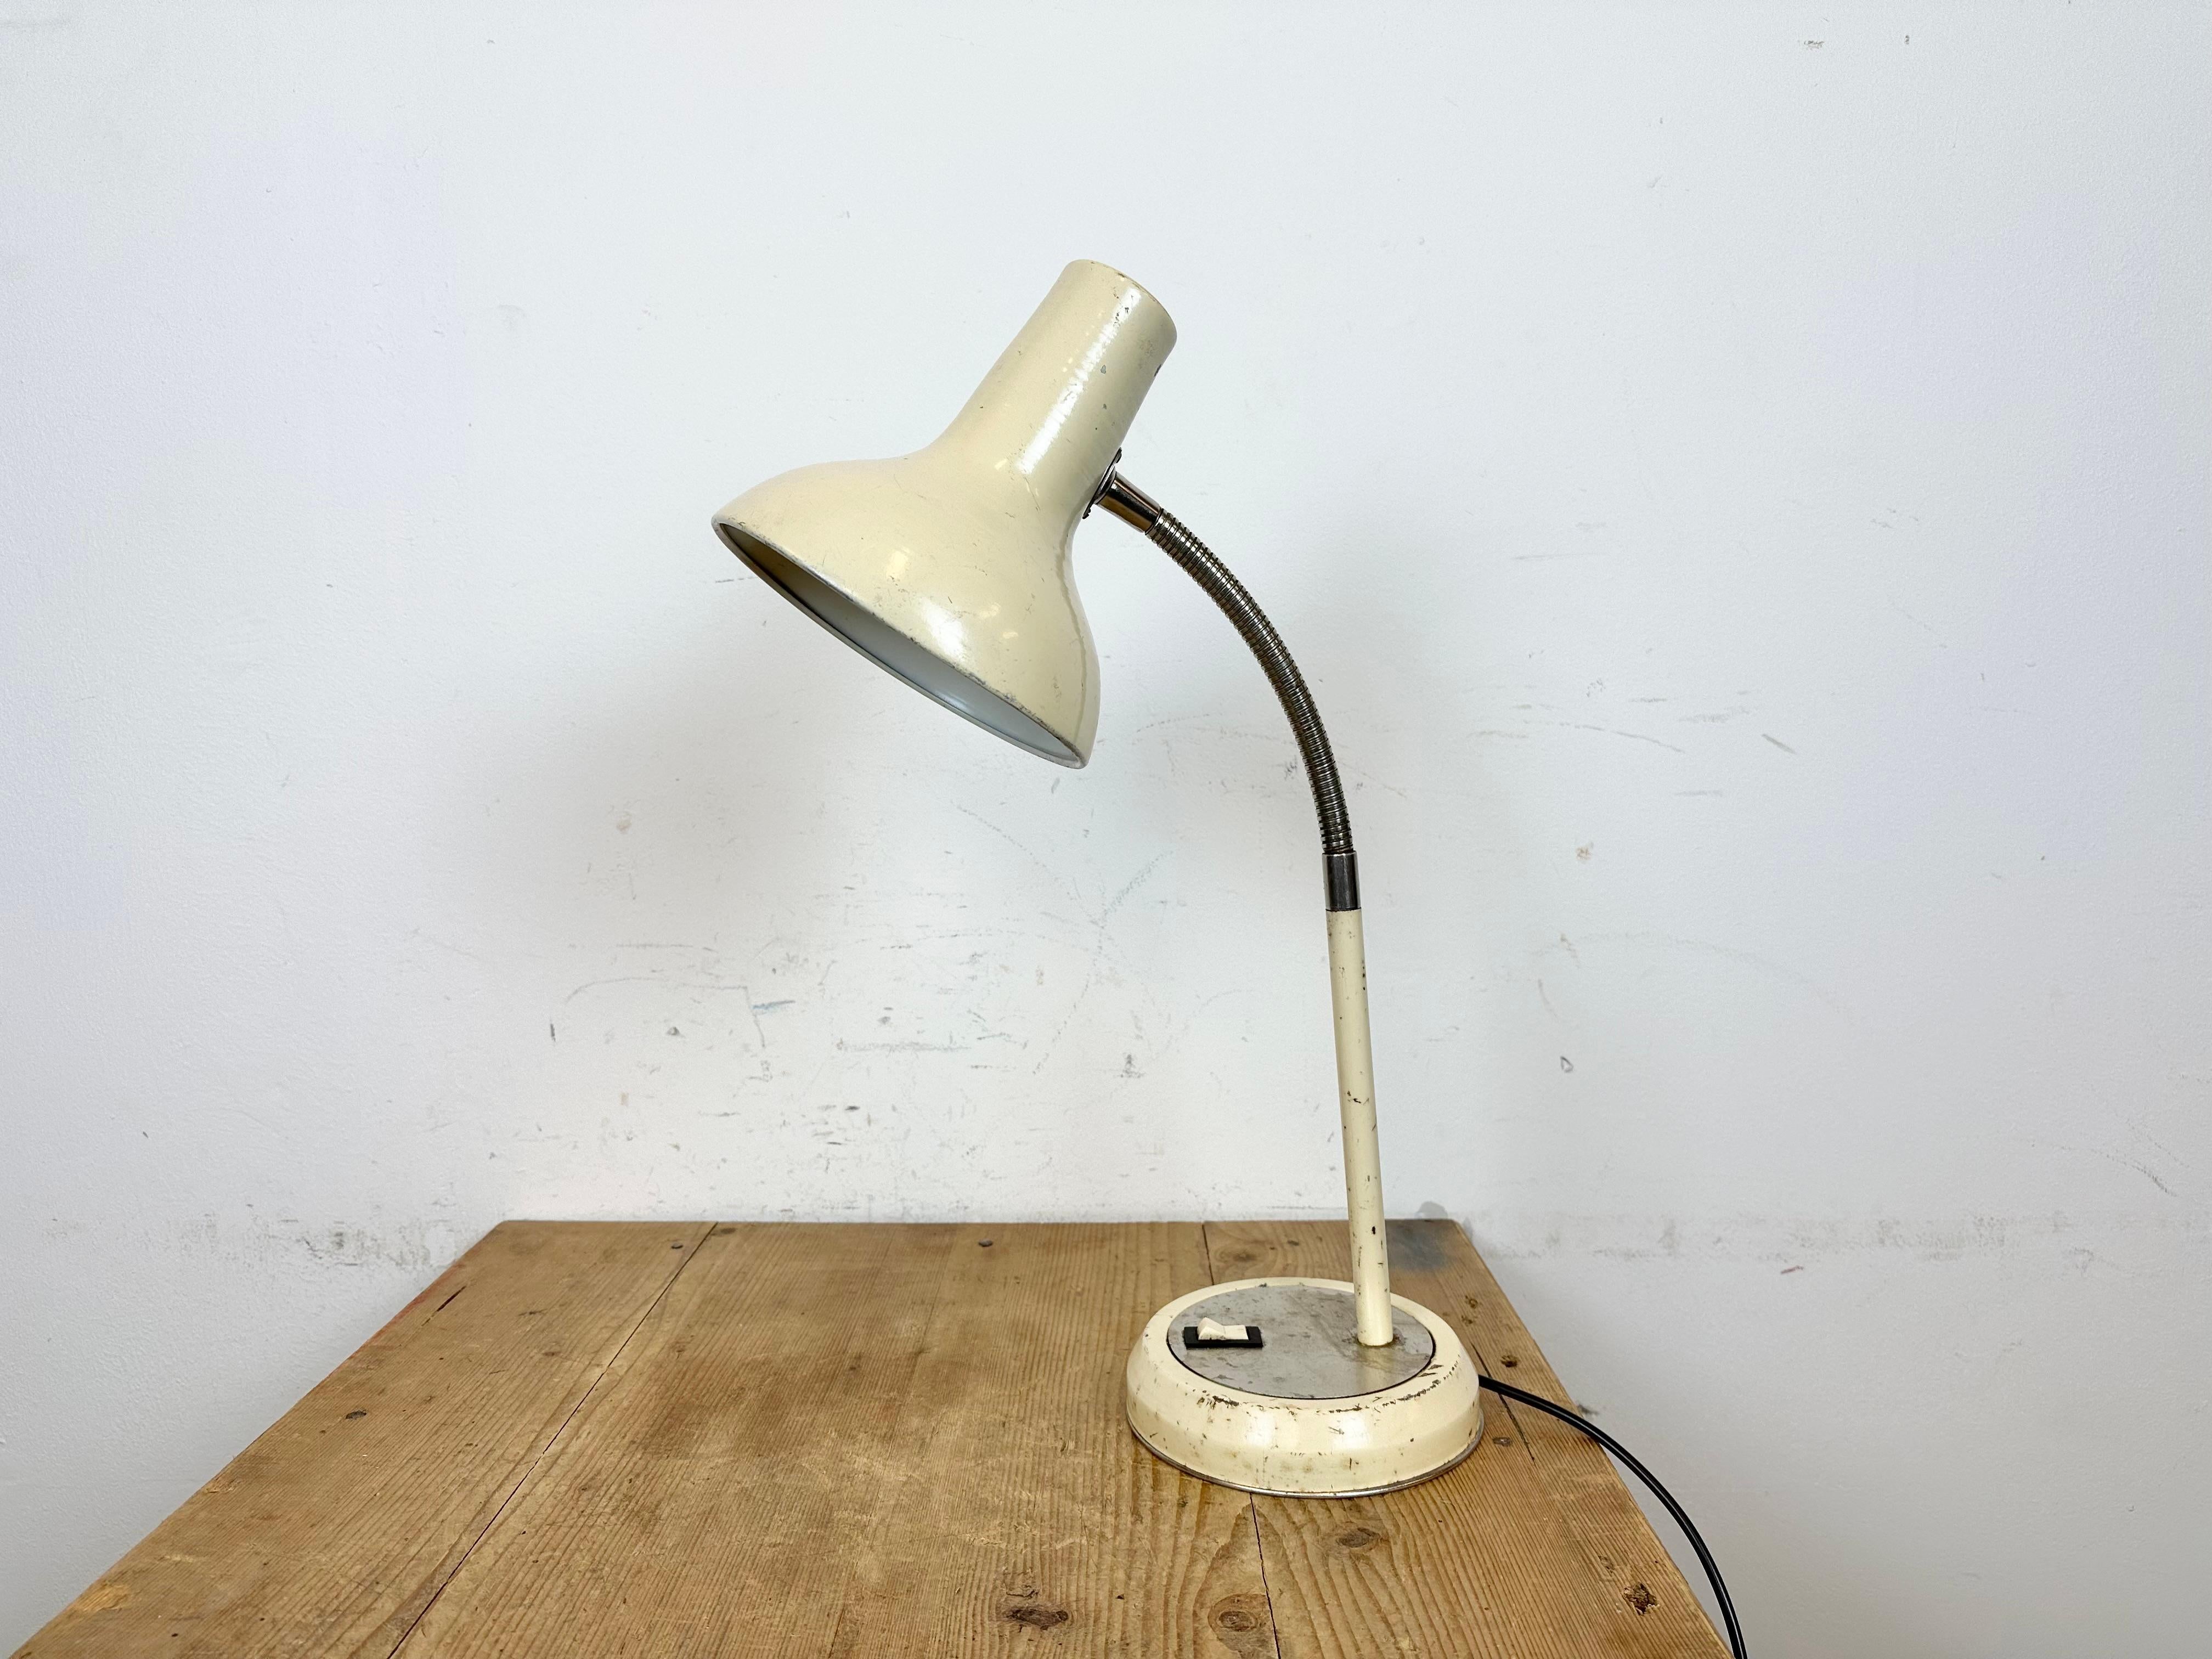 Industrial adjustable workshop table lamp made by Polam Wilkasy in Poland during the 1960s. It features an aluminium shade,a metal base with original switch and a chrome plated gooseneck. The original socket requires standard E27/E26 lightbulbs.
The